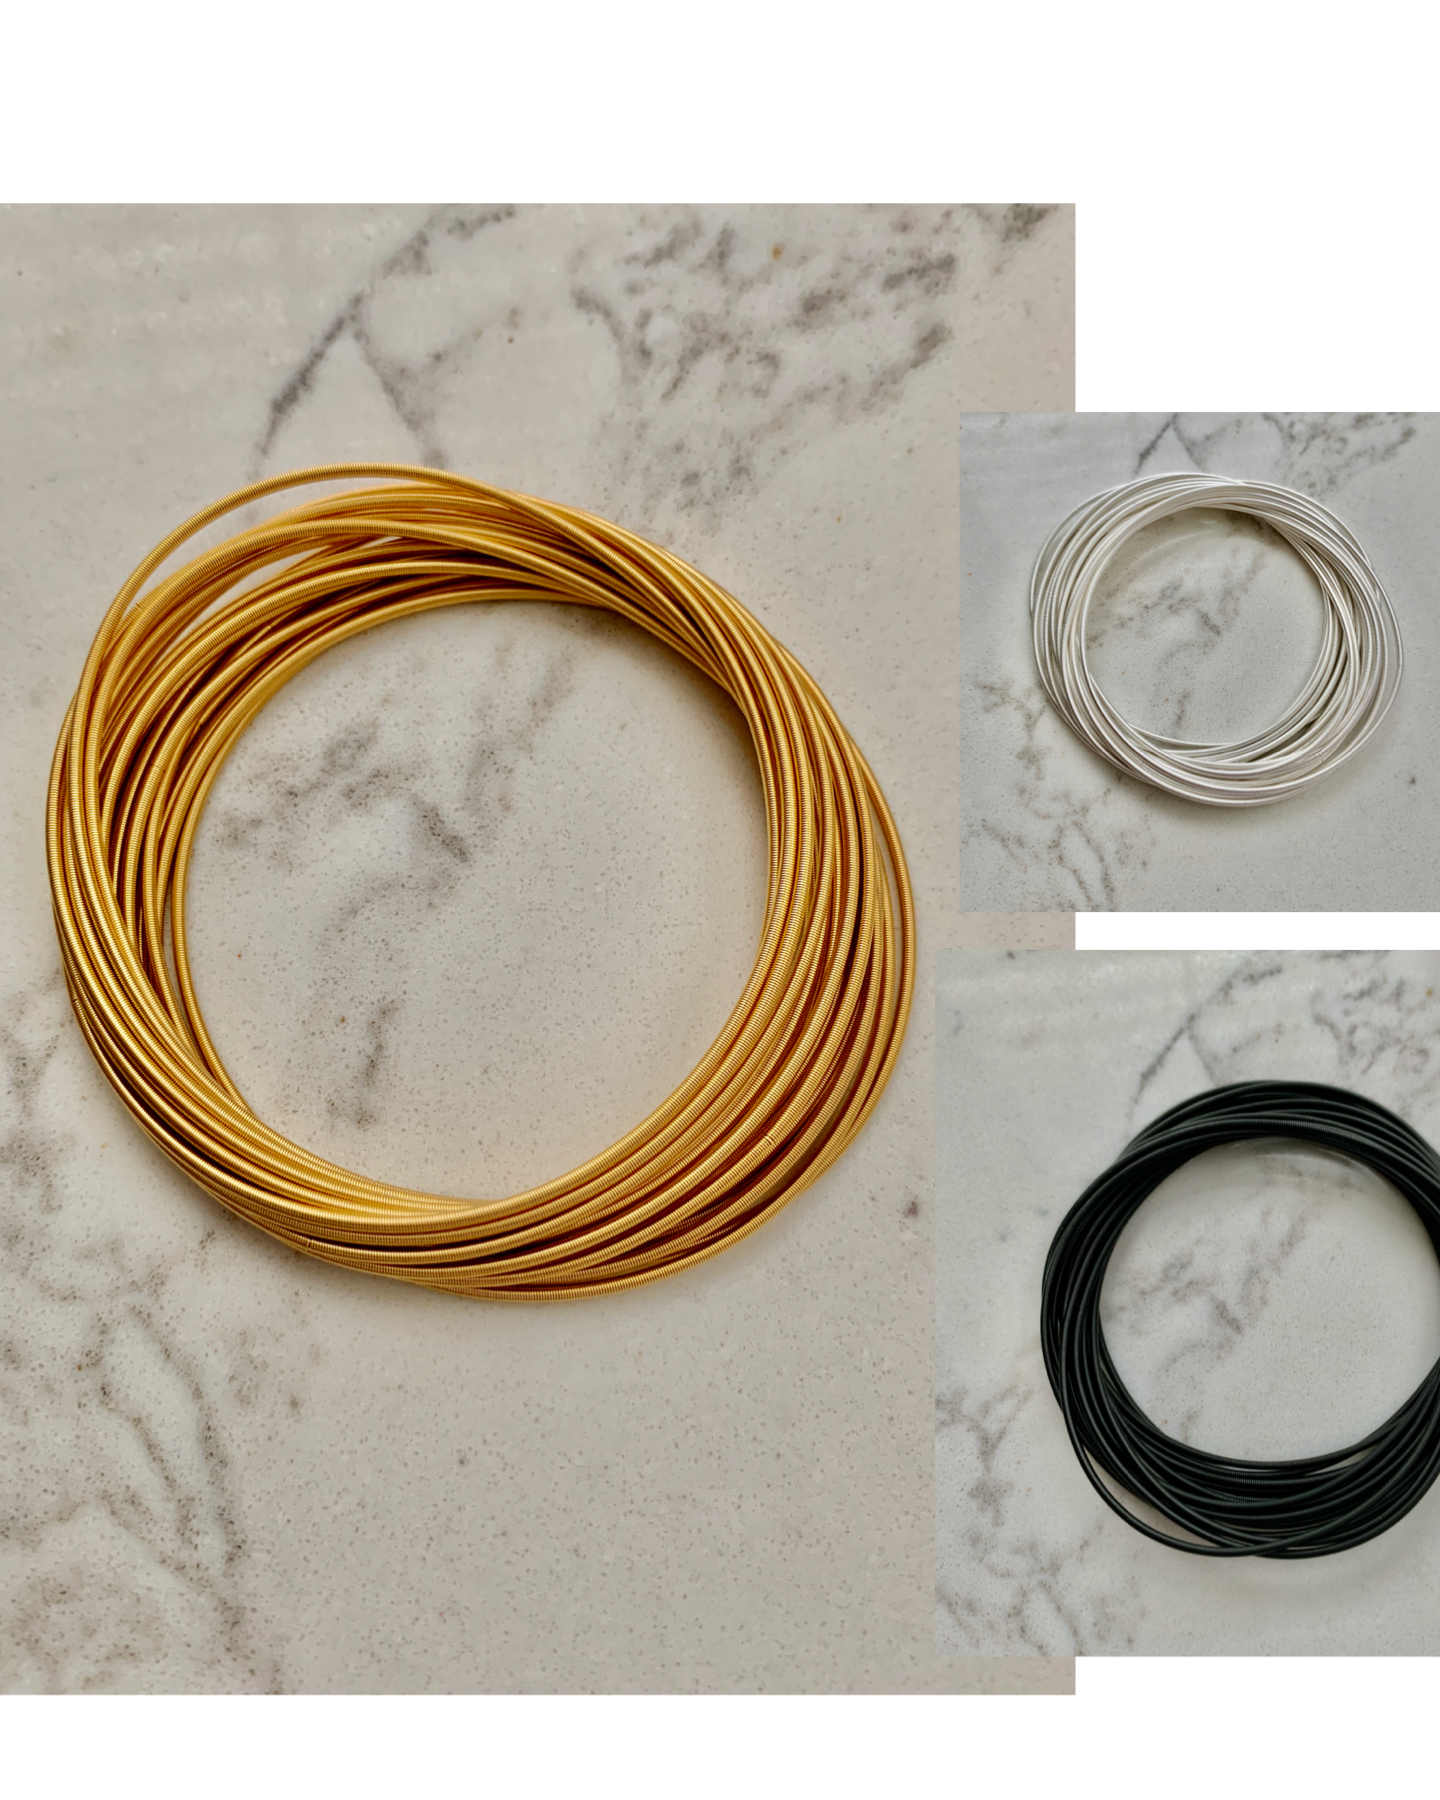 Stainless Steel Gold Plated Guitar String Bracelets - Set of 20.